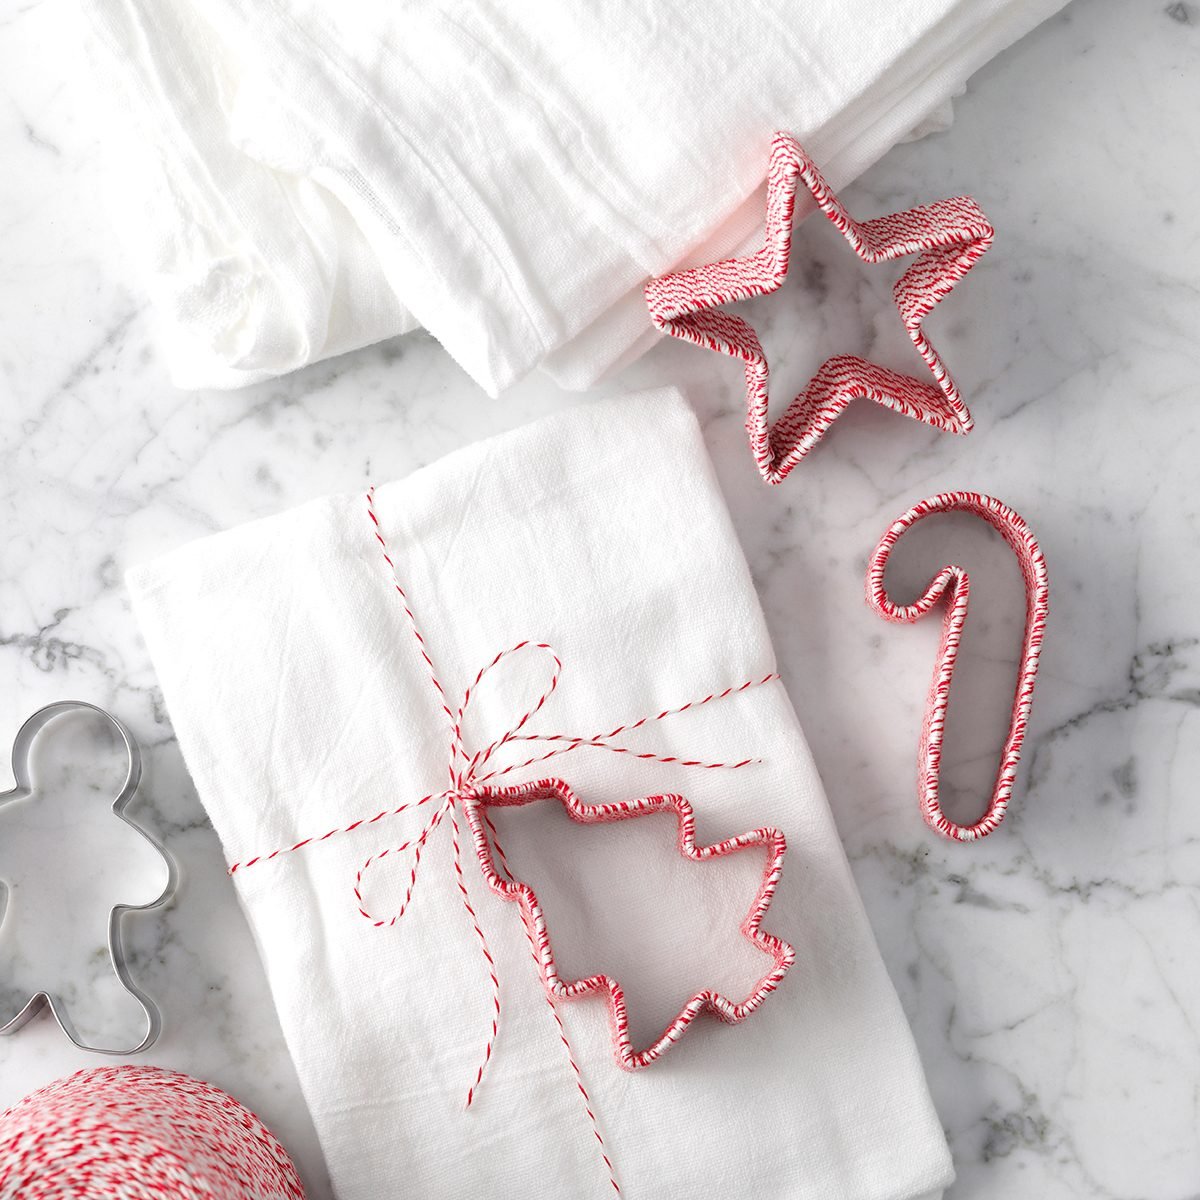 19 Homemade Christmas Ornaments to Decorate Your Tree With